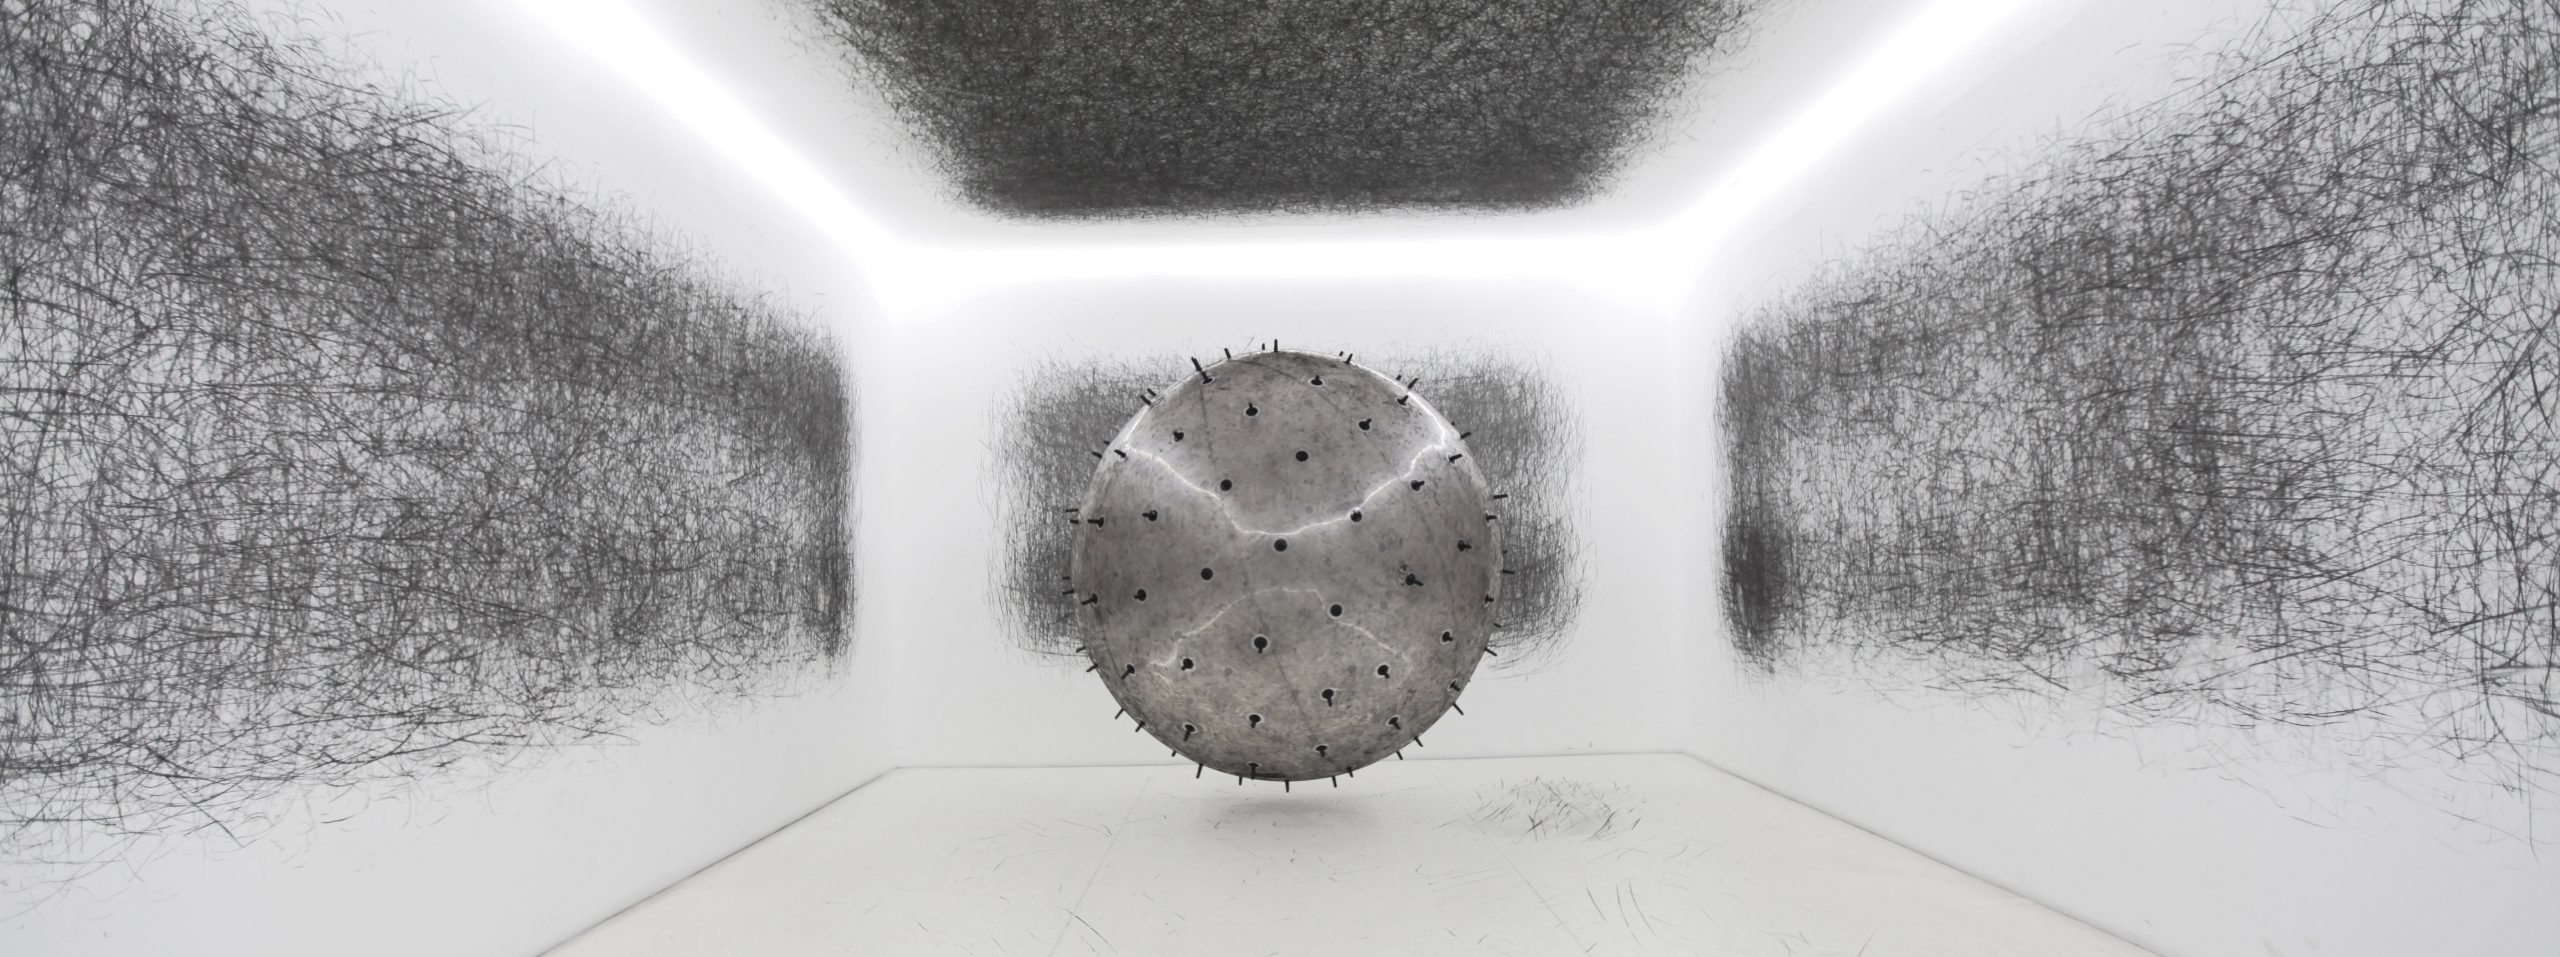 A photograph of 'ADA Kinetic Sculpture'. ADA is a gigantic interactive analogue installation - an inflatable ball with charcoal spikes protruding from it. Exhibit visitors  push the ball around an entirely white room during the life of the exhibition, creating random charcoal markings all over the space. The room in the photograph has abstract black marks all over the walls, ceiling and floor. 